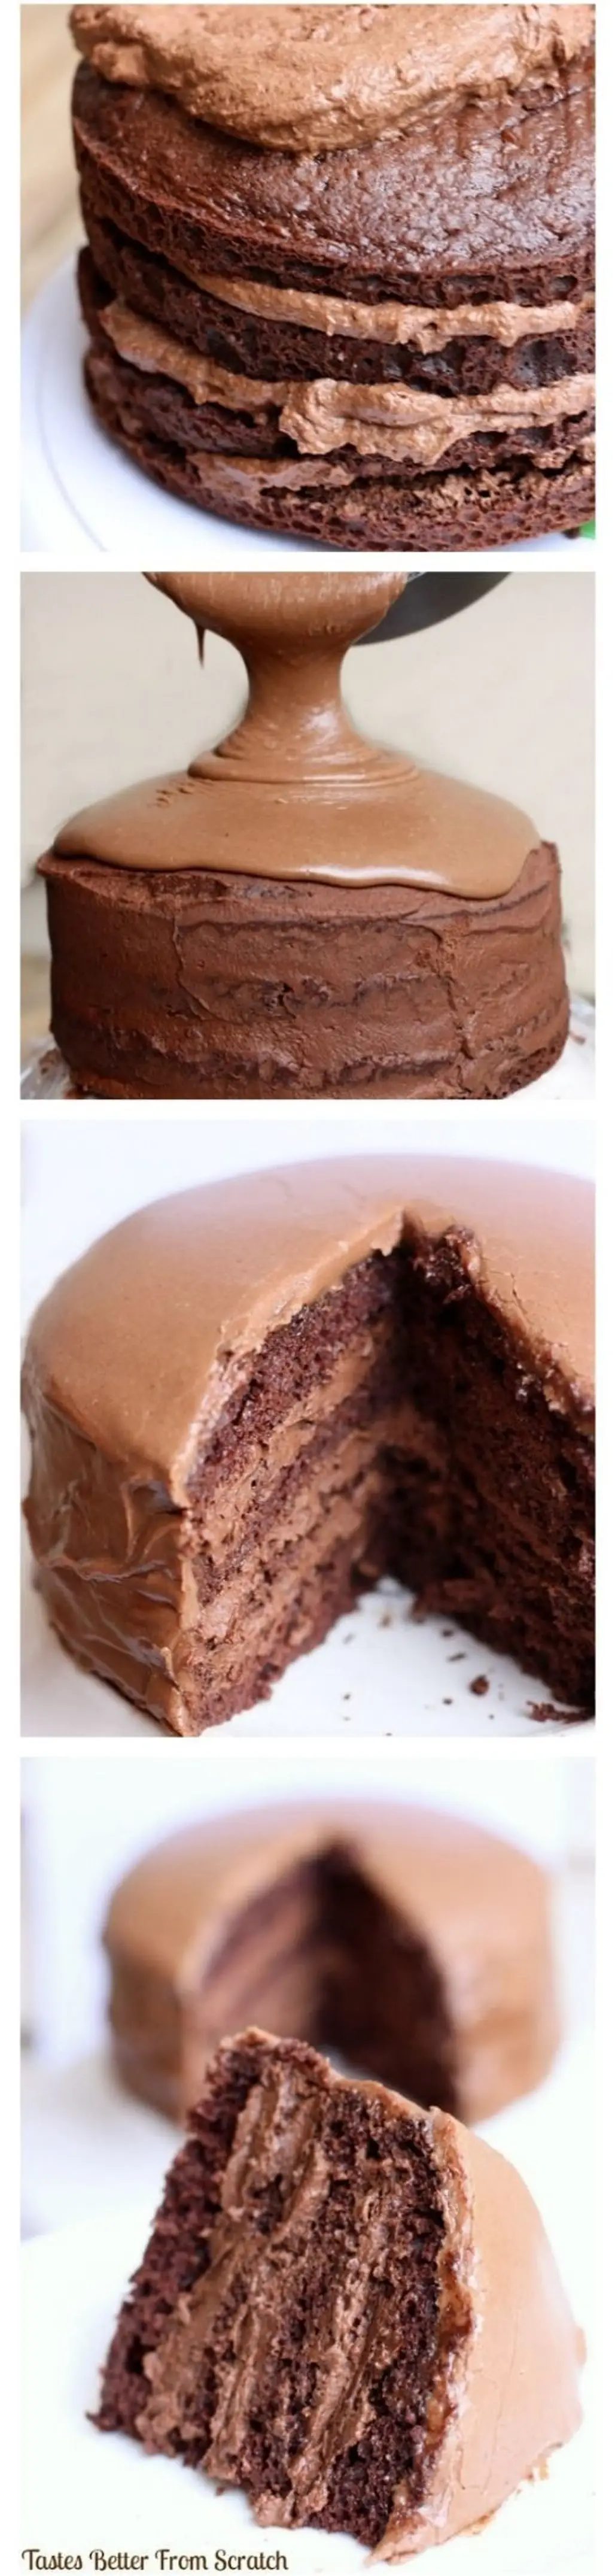 Chocolate Cake with Chocolate Mousse Filling